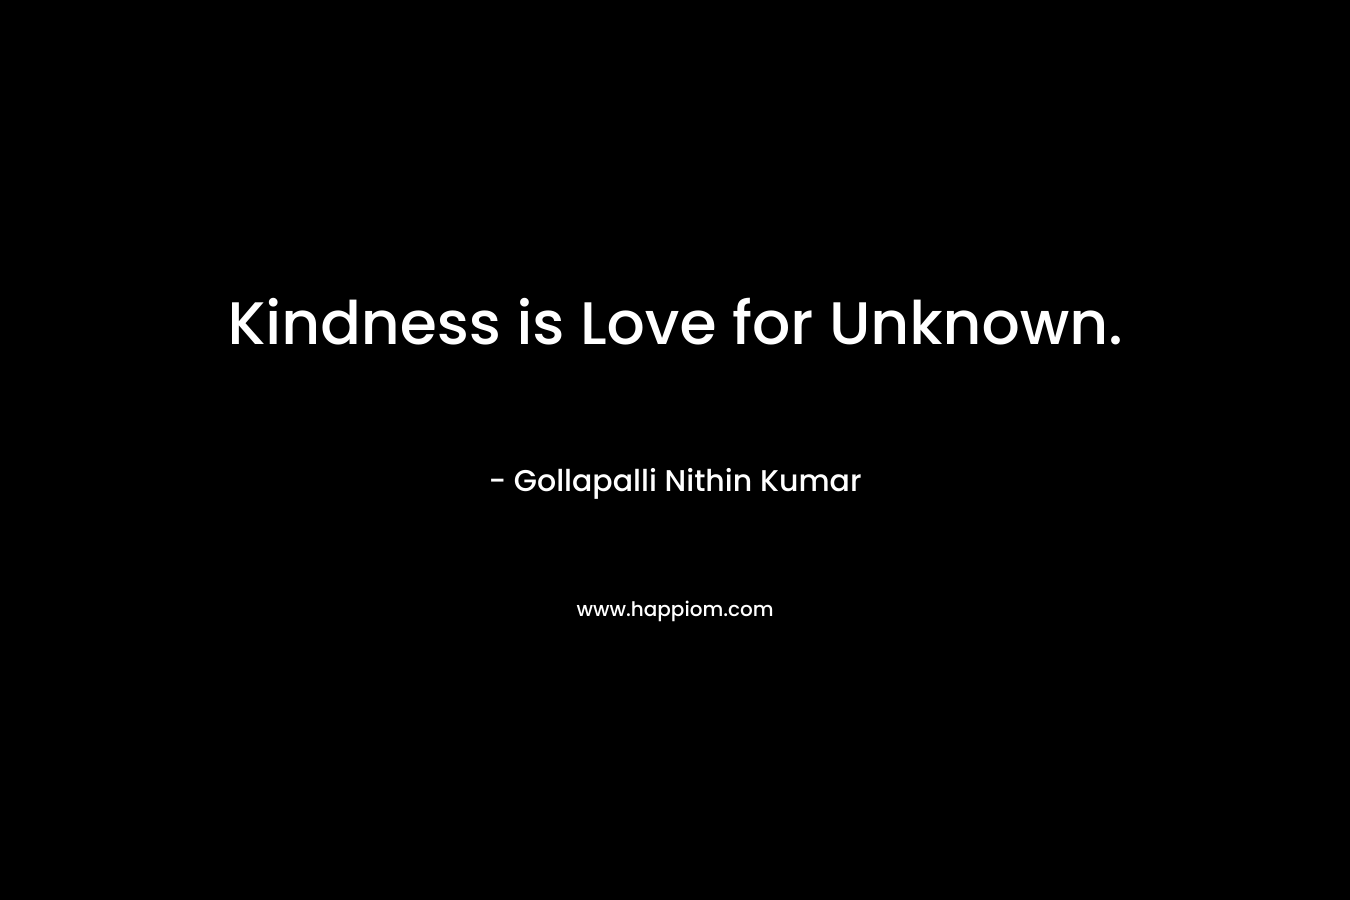 Kindness is Love for Unknown.